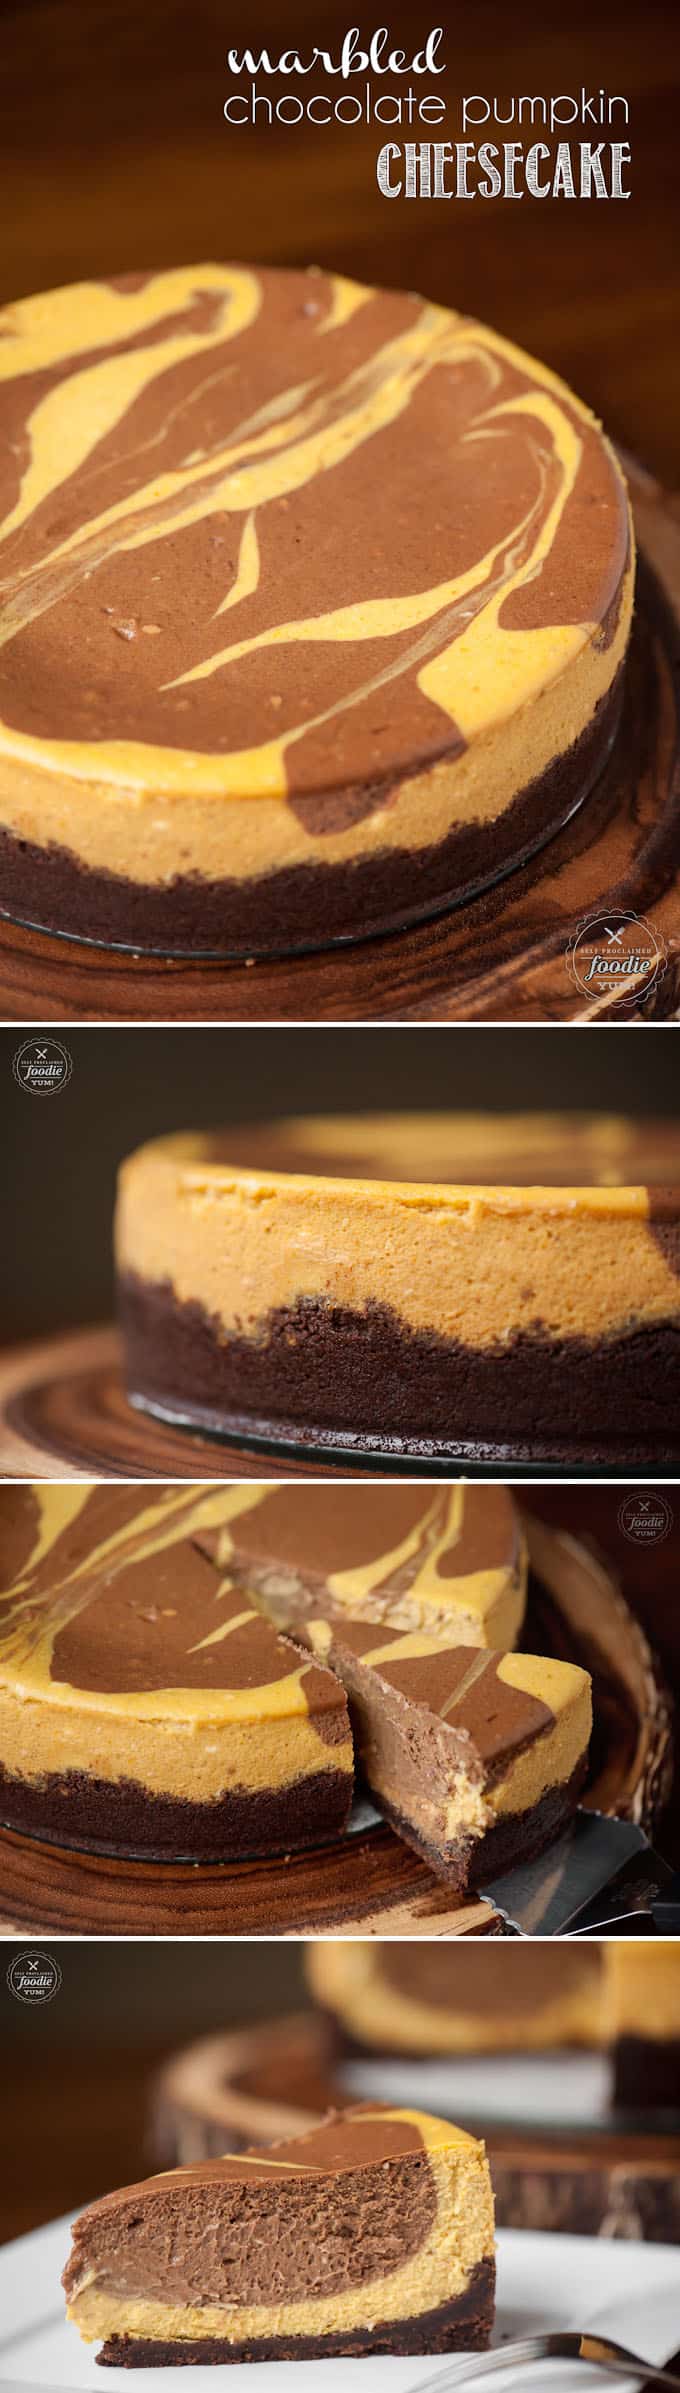 This homemade Marbled Chocolate Pumpkin Cheesecake made with a chocolate graham cracker crust and pumpkin puree is the perfect fall or Thanksgiving dessert!